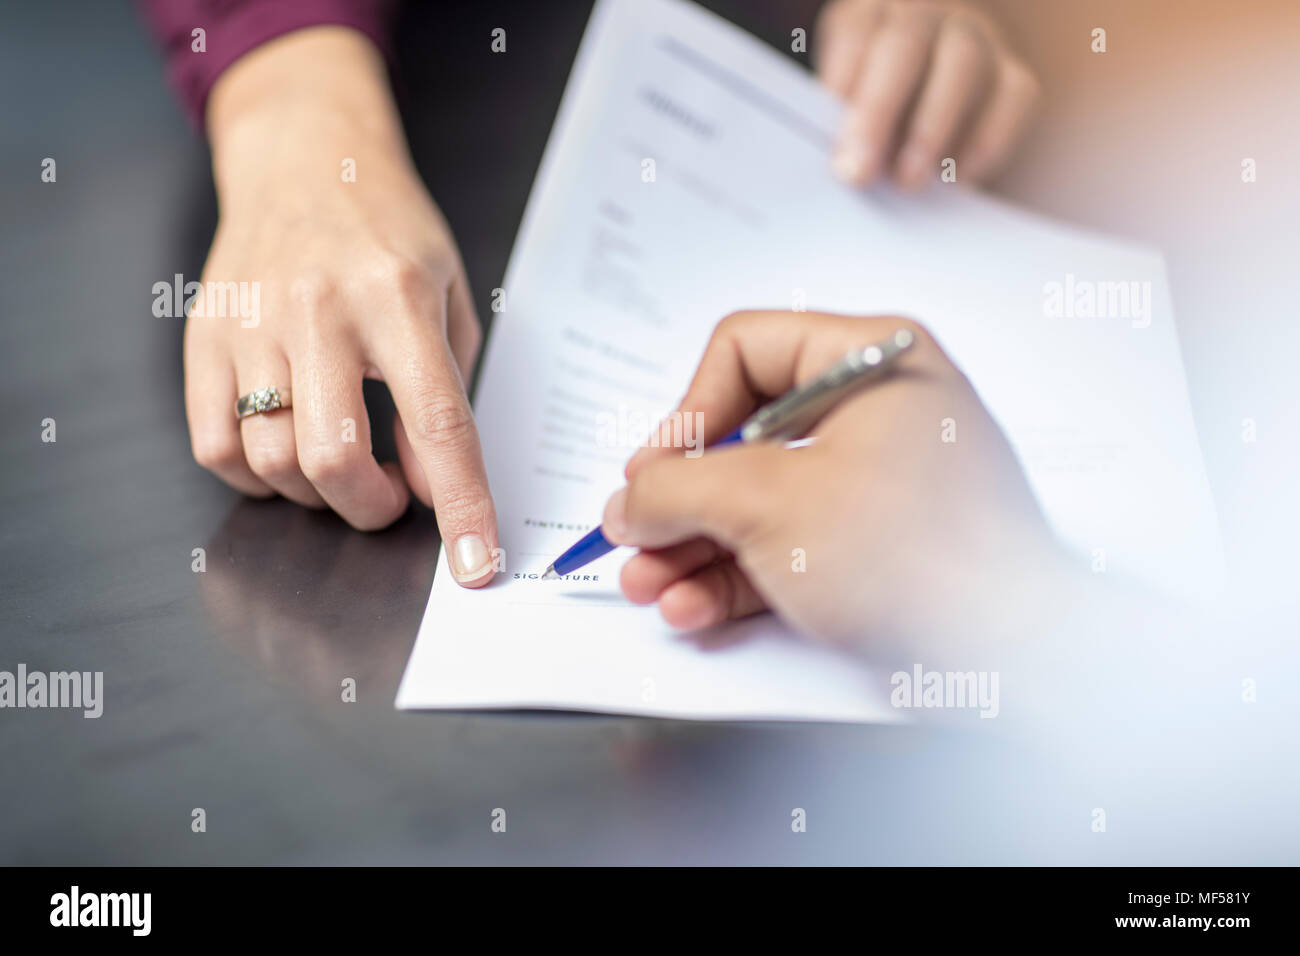 Close-up of signing a document Stock Photo